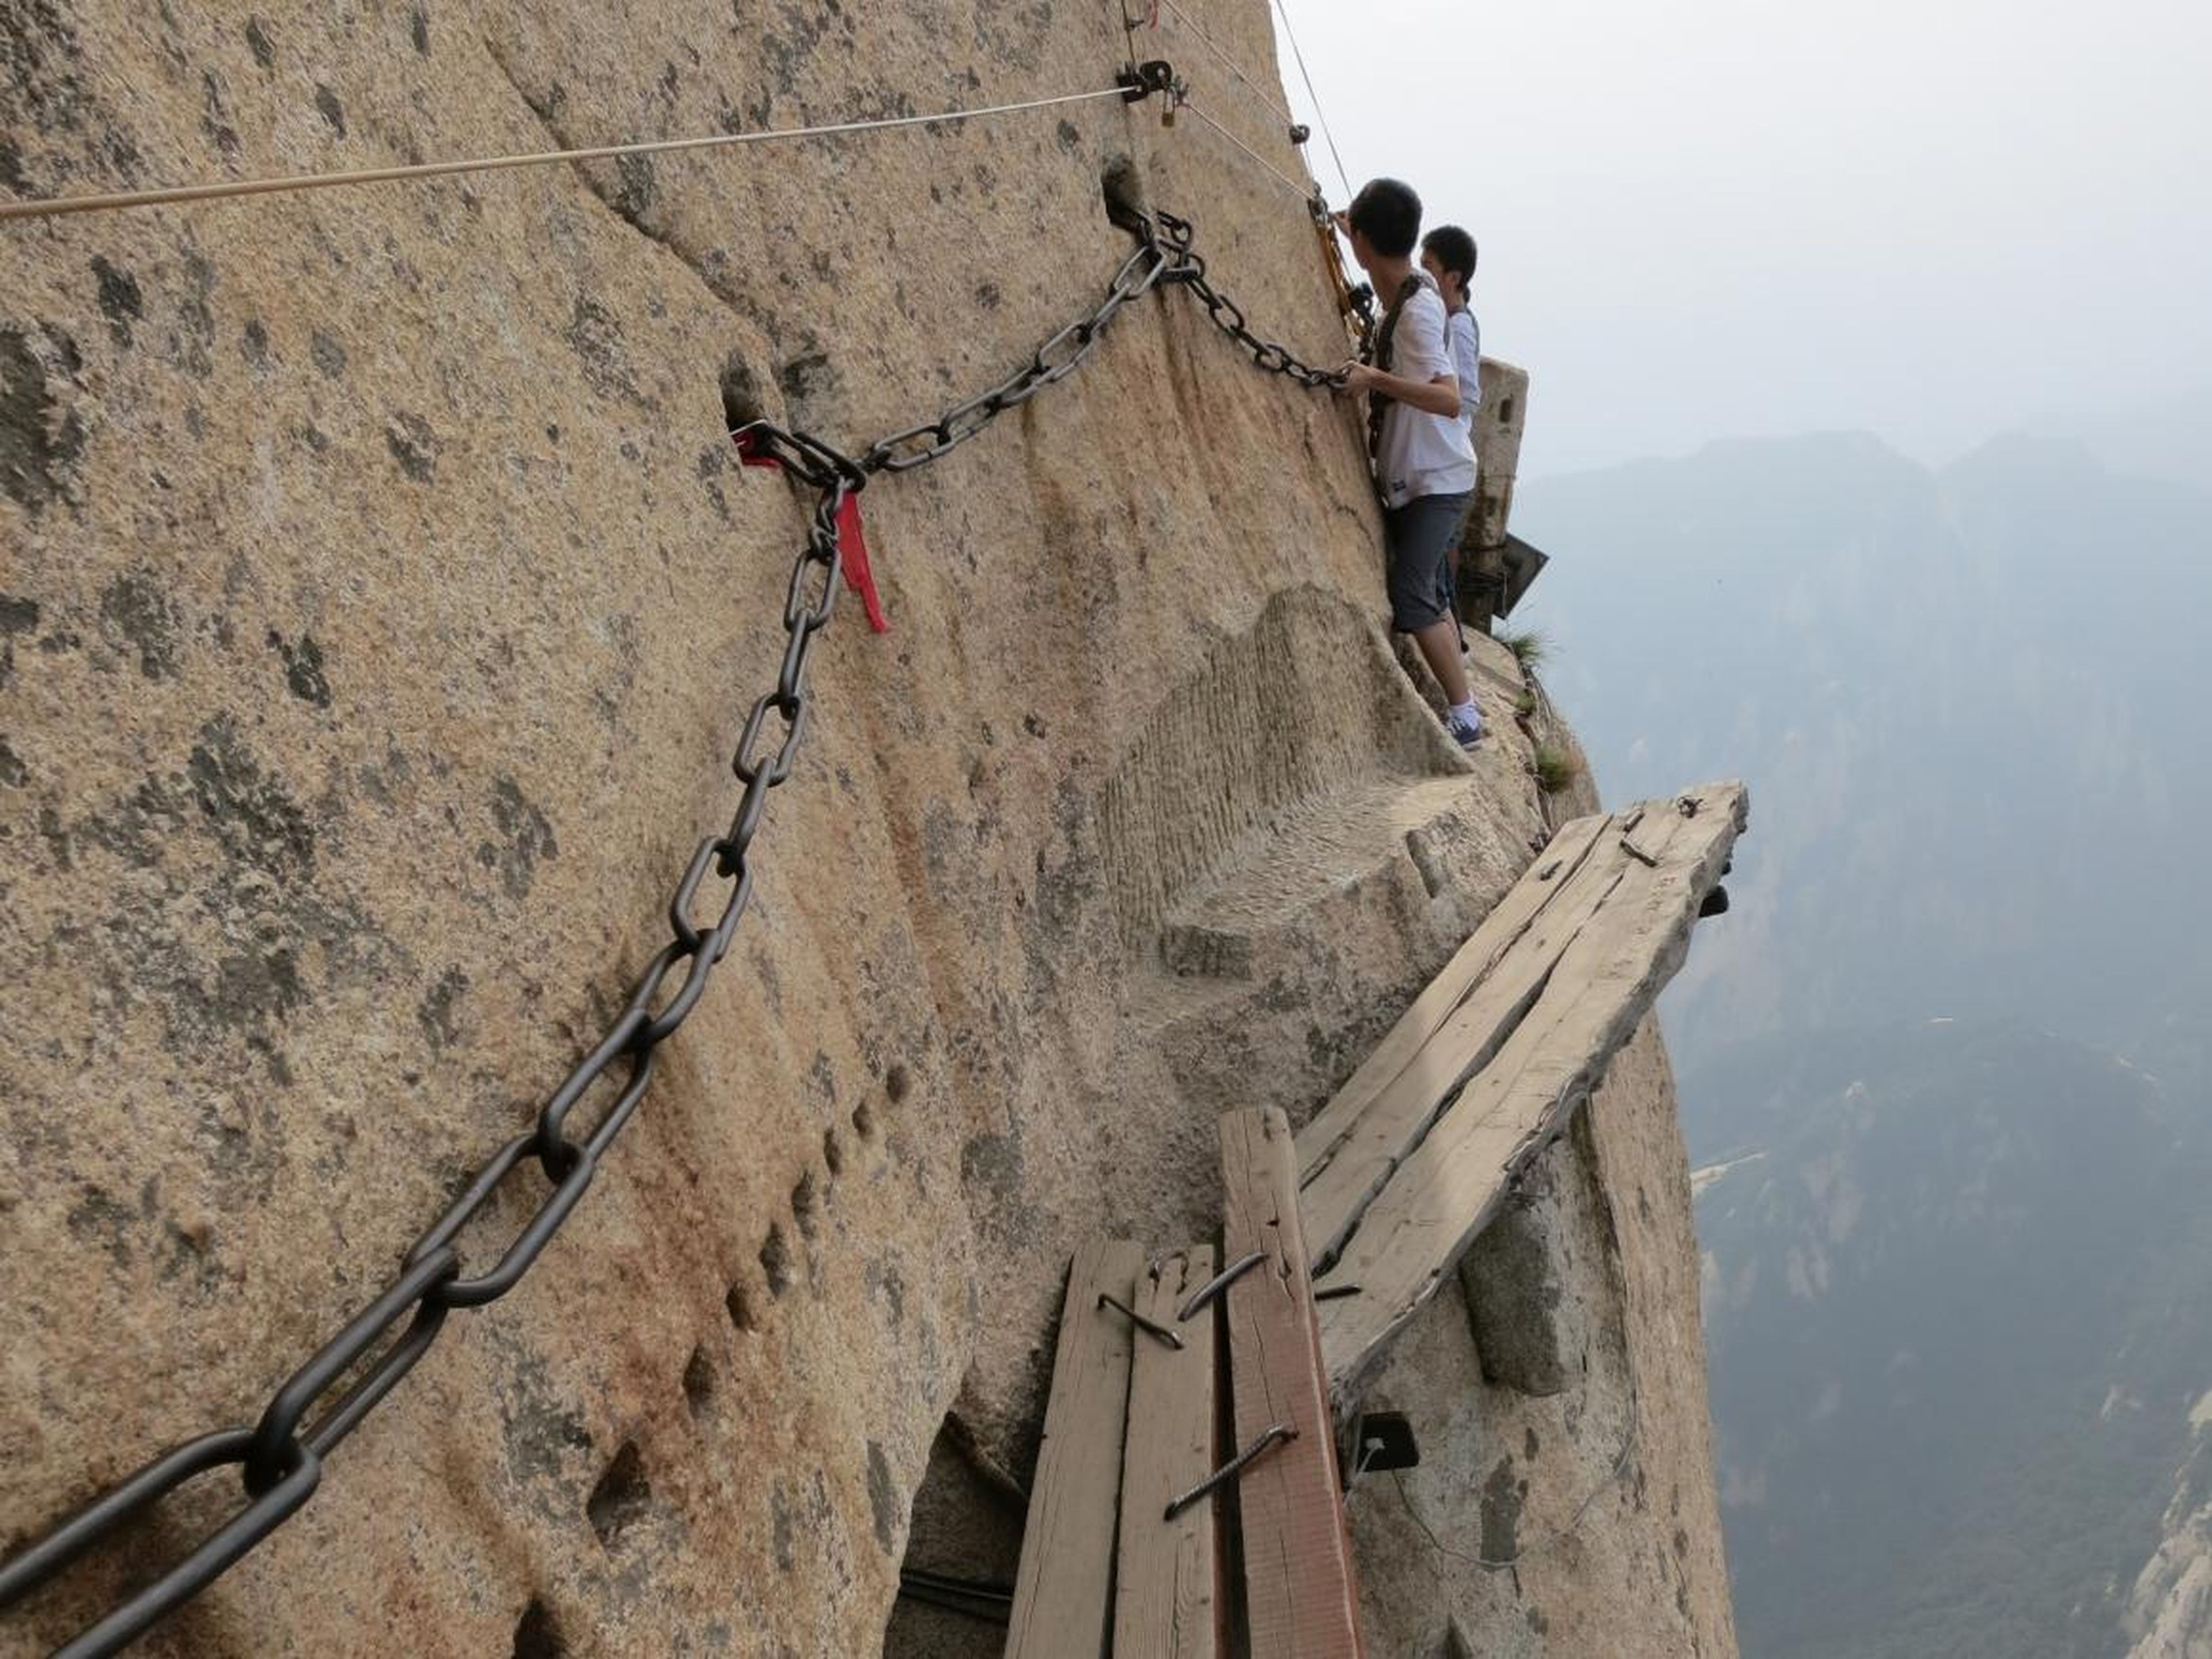 While breathtaking, it's considered to be one of the world's most dangerous places to hike, due in large part to the infamous plank walk located on the mountain's highest peak, South, which has a height of 7,070 feet.